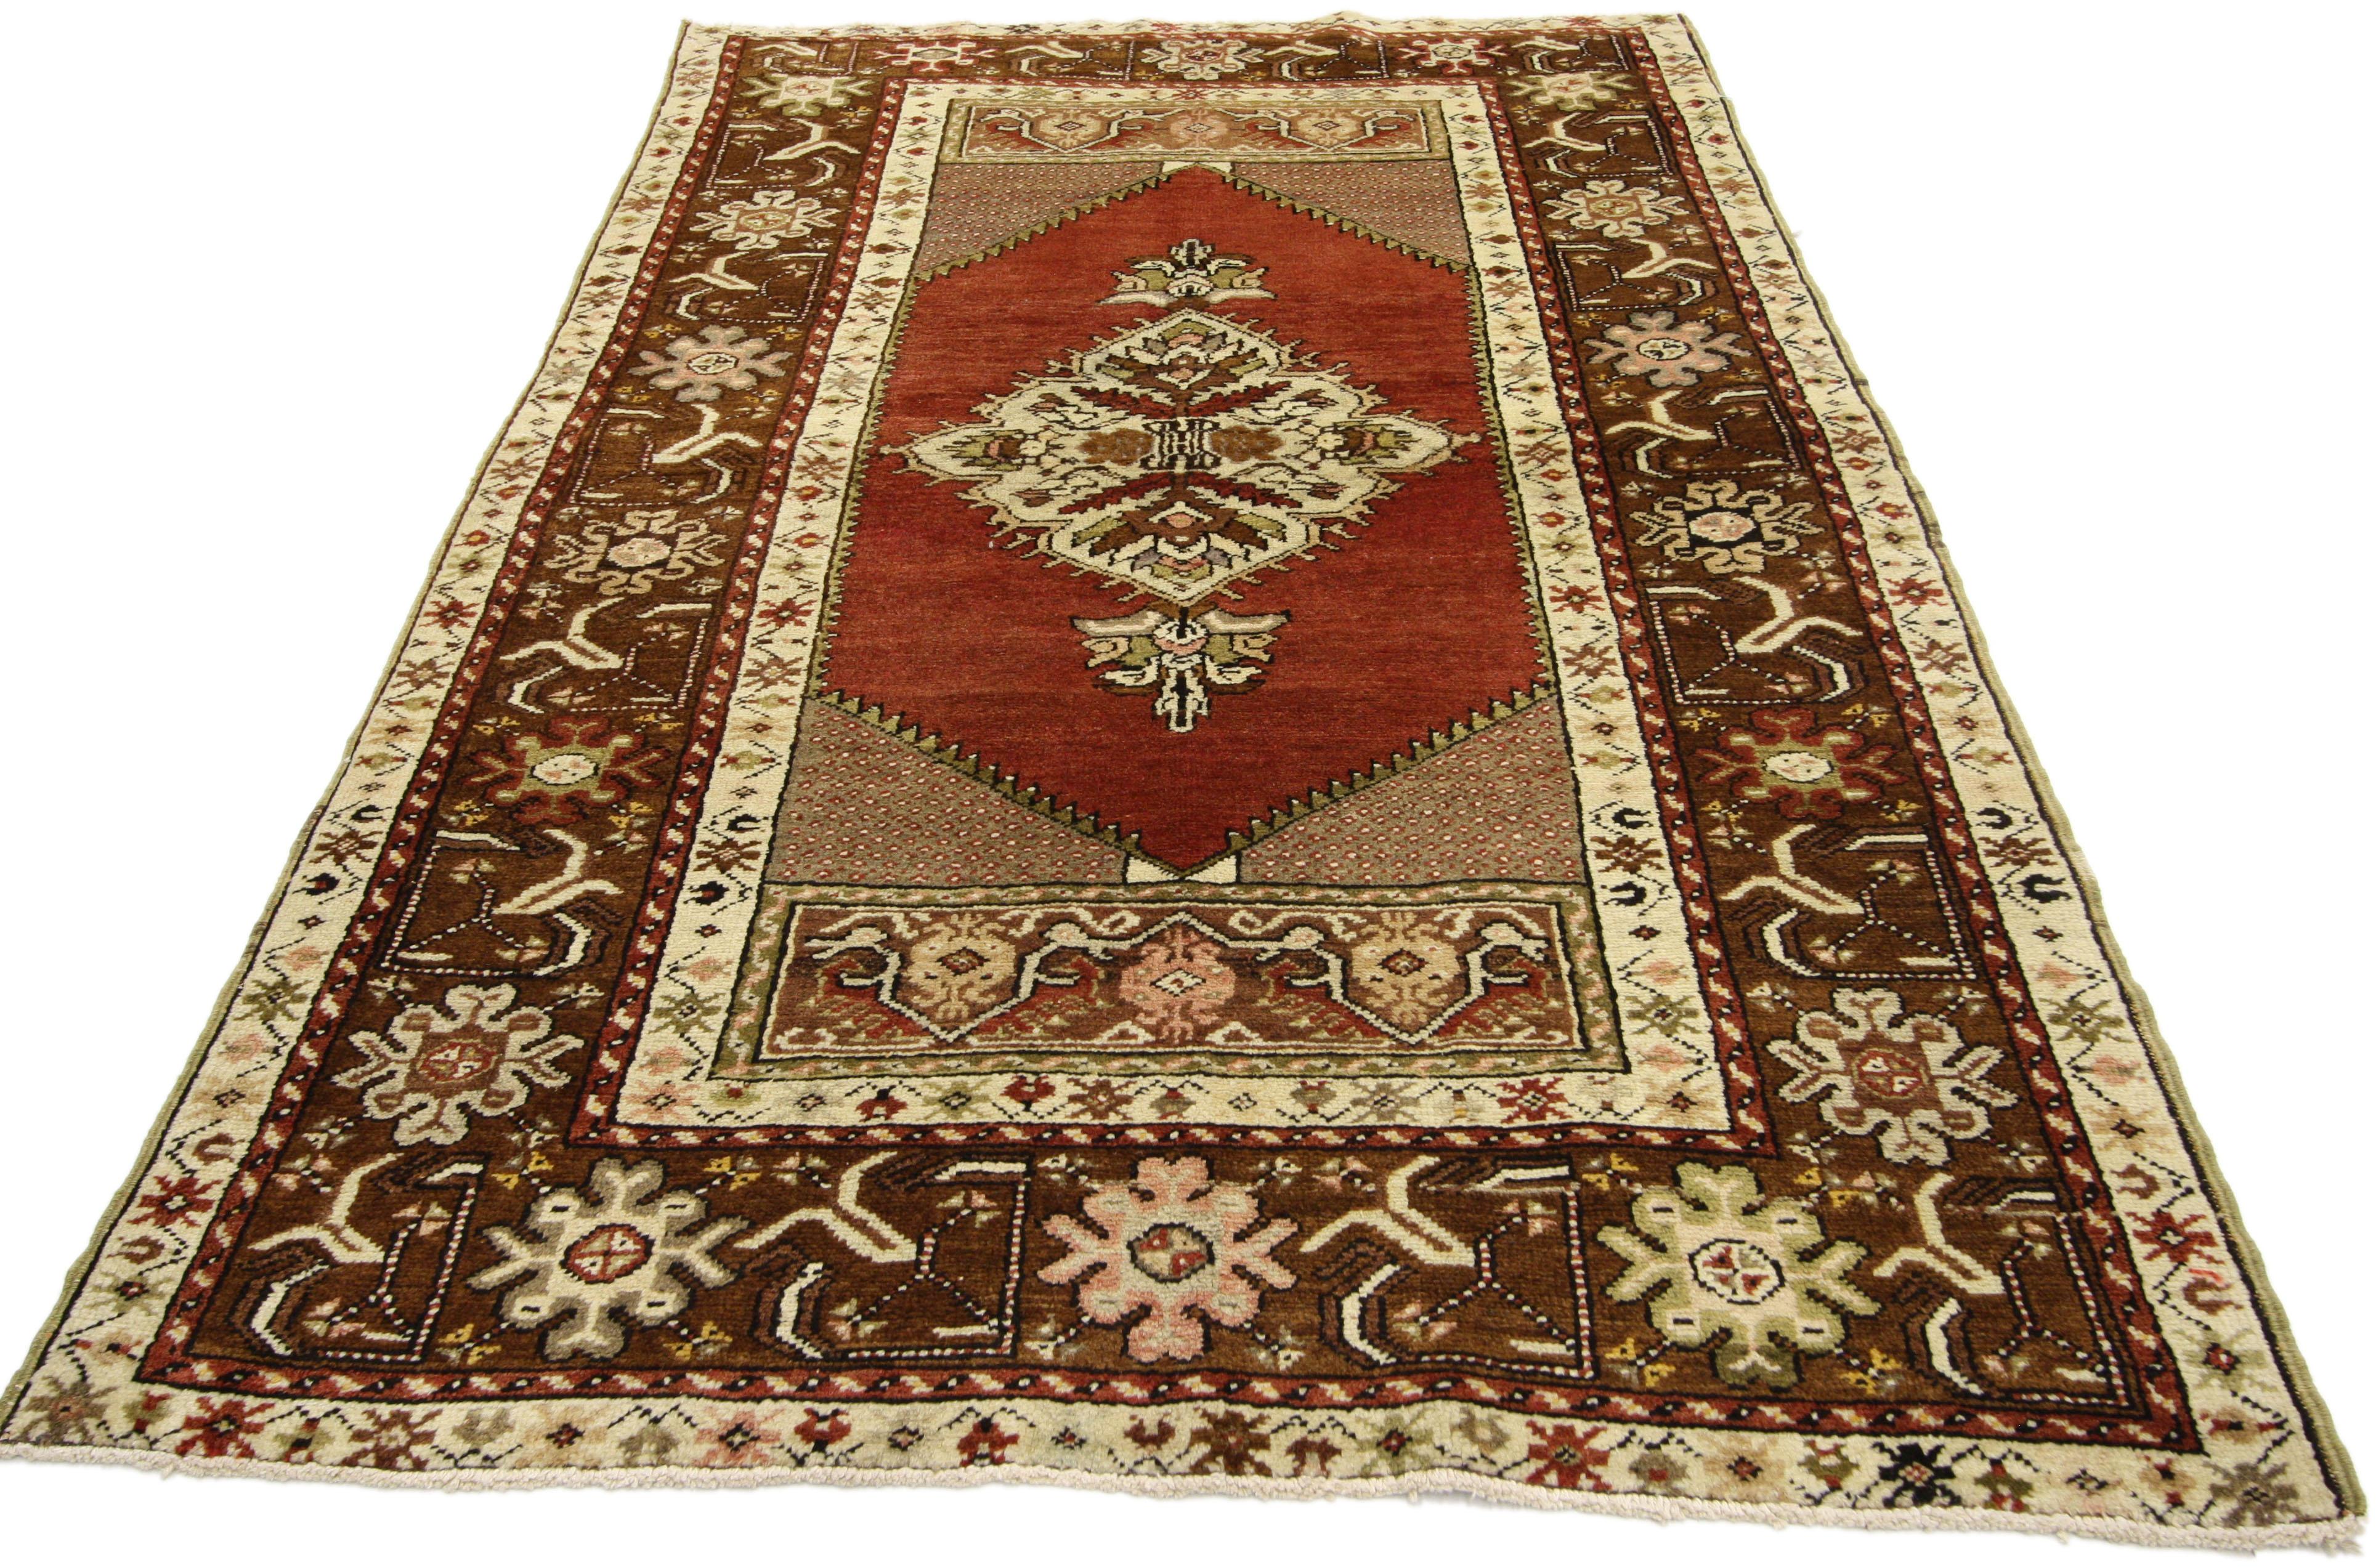 73862 Vintage Turkish Oushak Rug, Entry or Foyer Rug 03'06 x 05'08. This vintage Turkish Oushak rug features a modern traditional style. Immersed in Anatolian history and refined colors, this vintage Turkish Oushak rug combines simplicity with